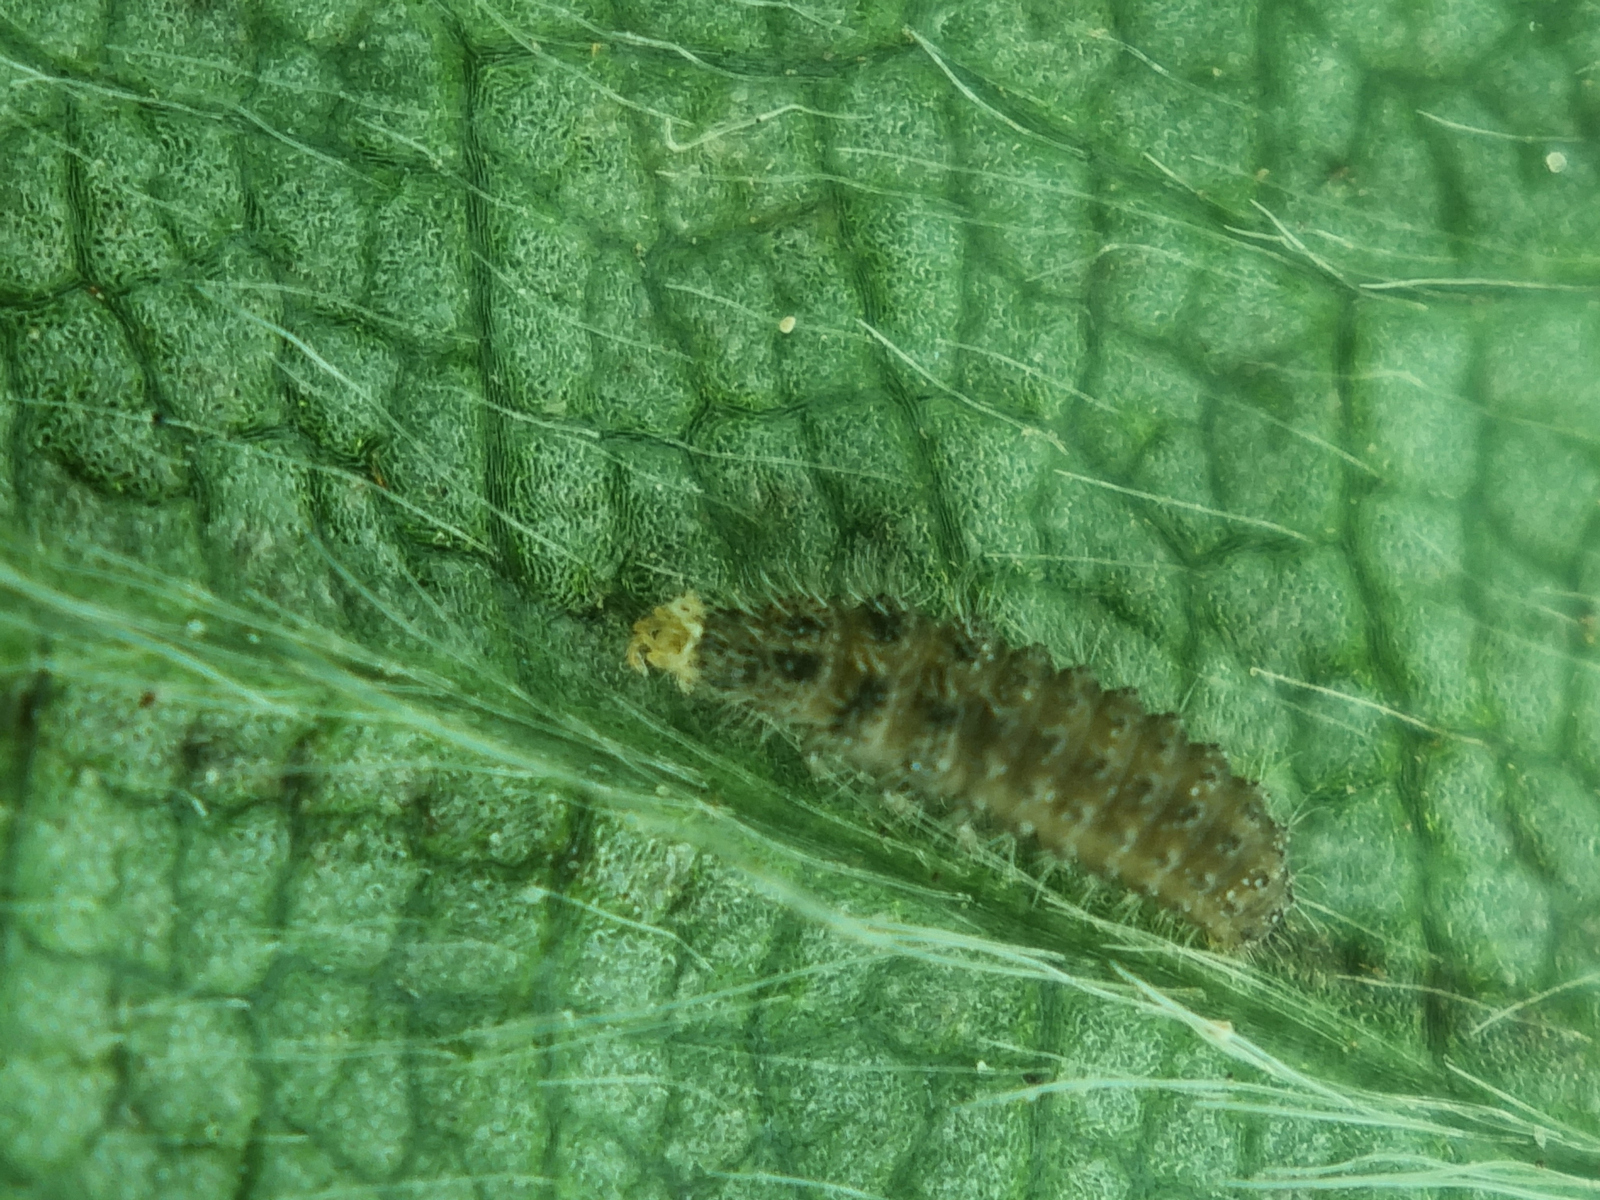 Lacewing larve eating spidermite